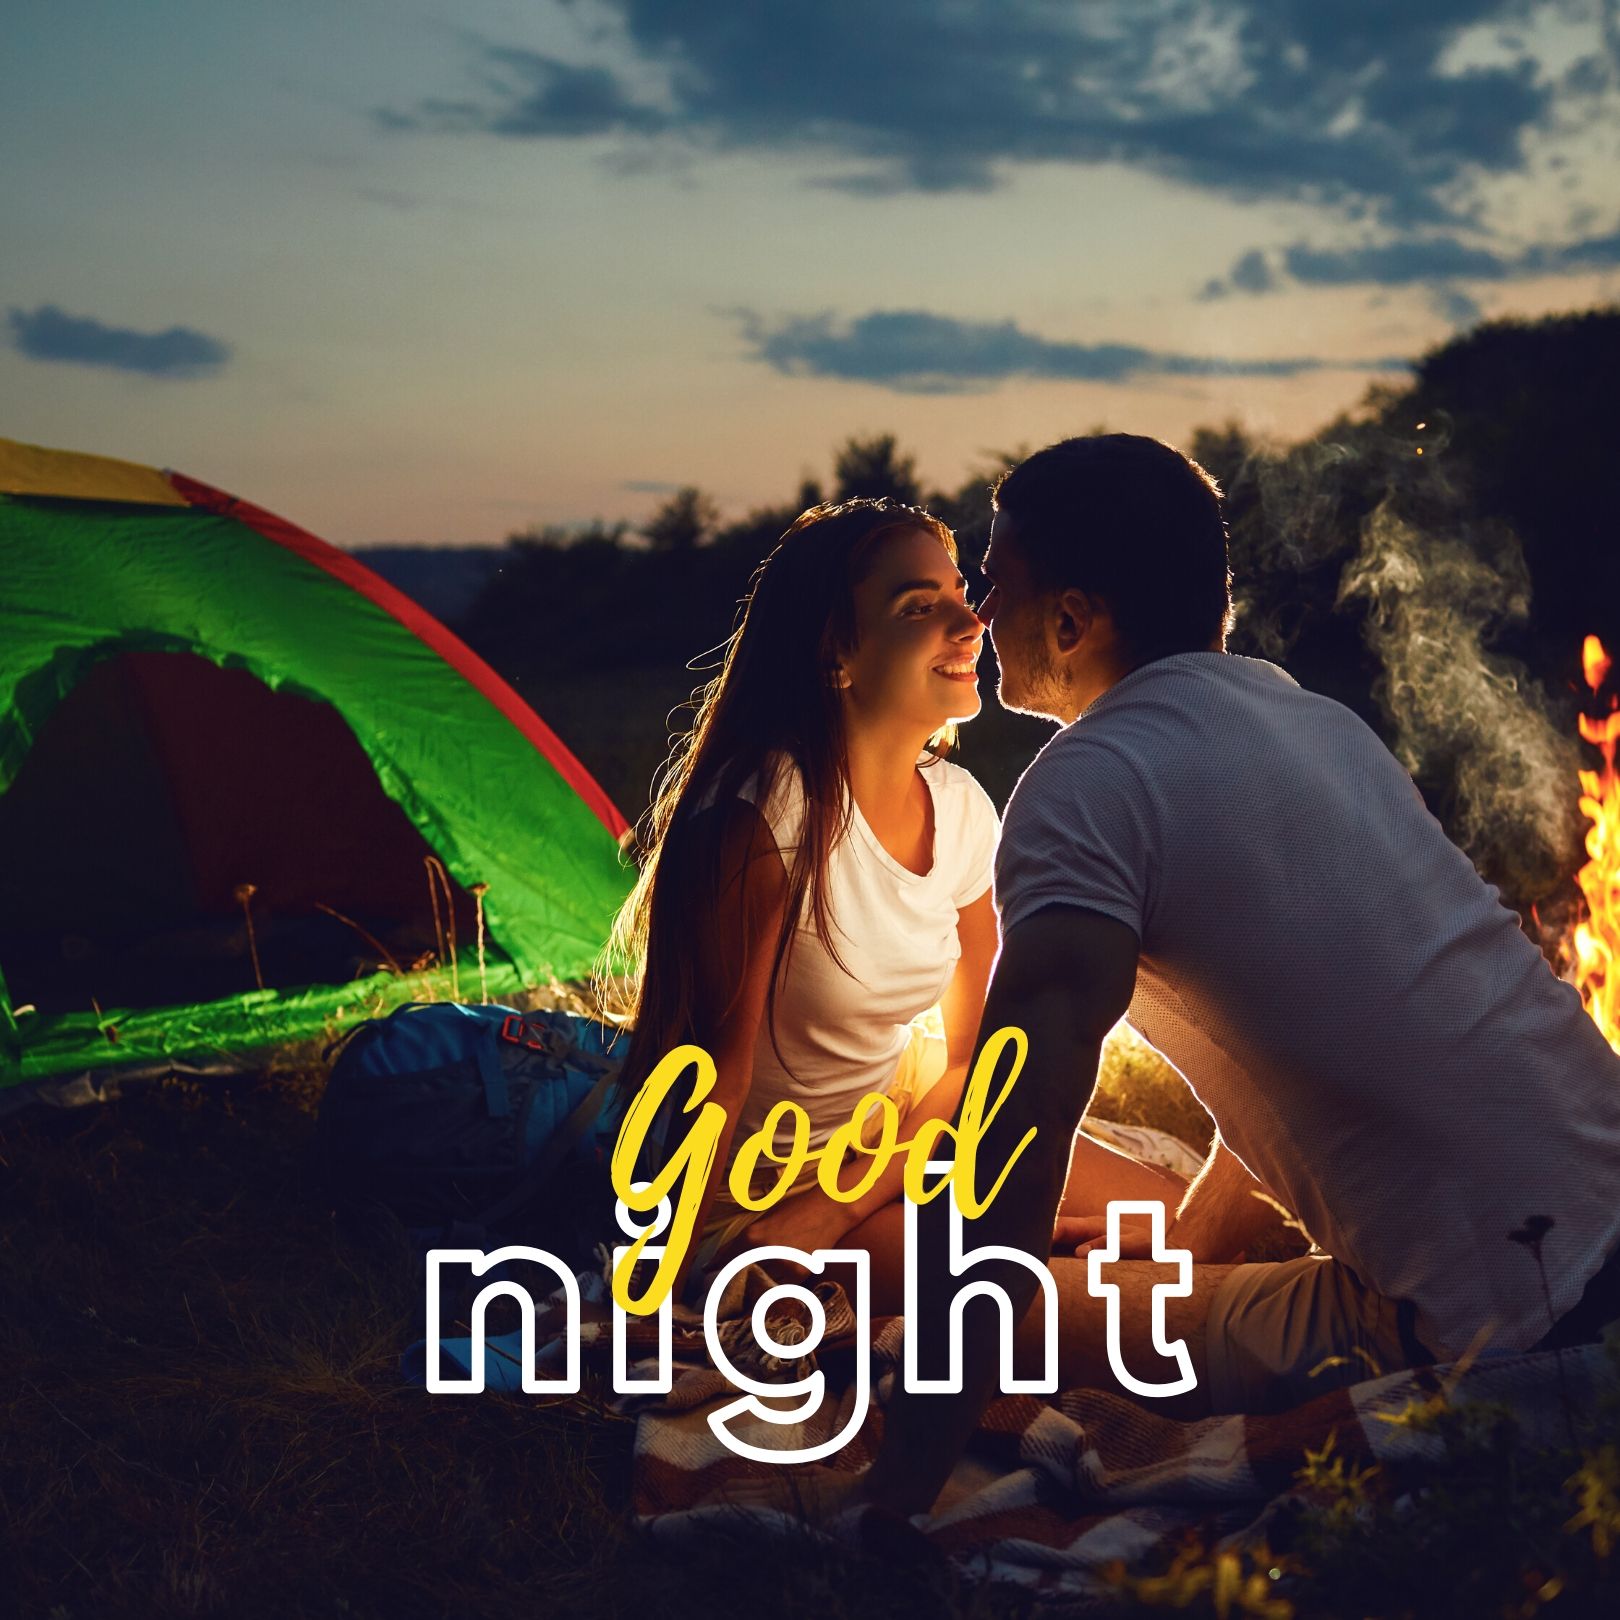 Good Night Image With Love Couple